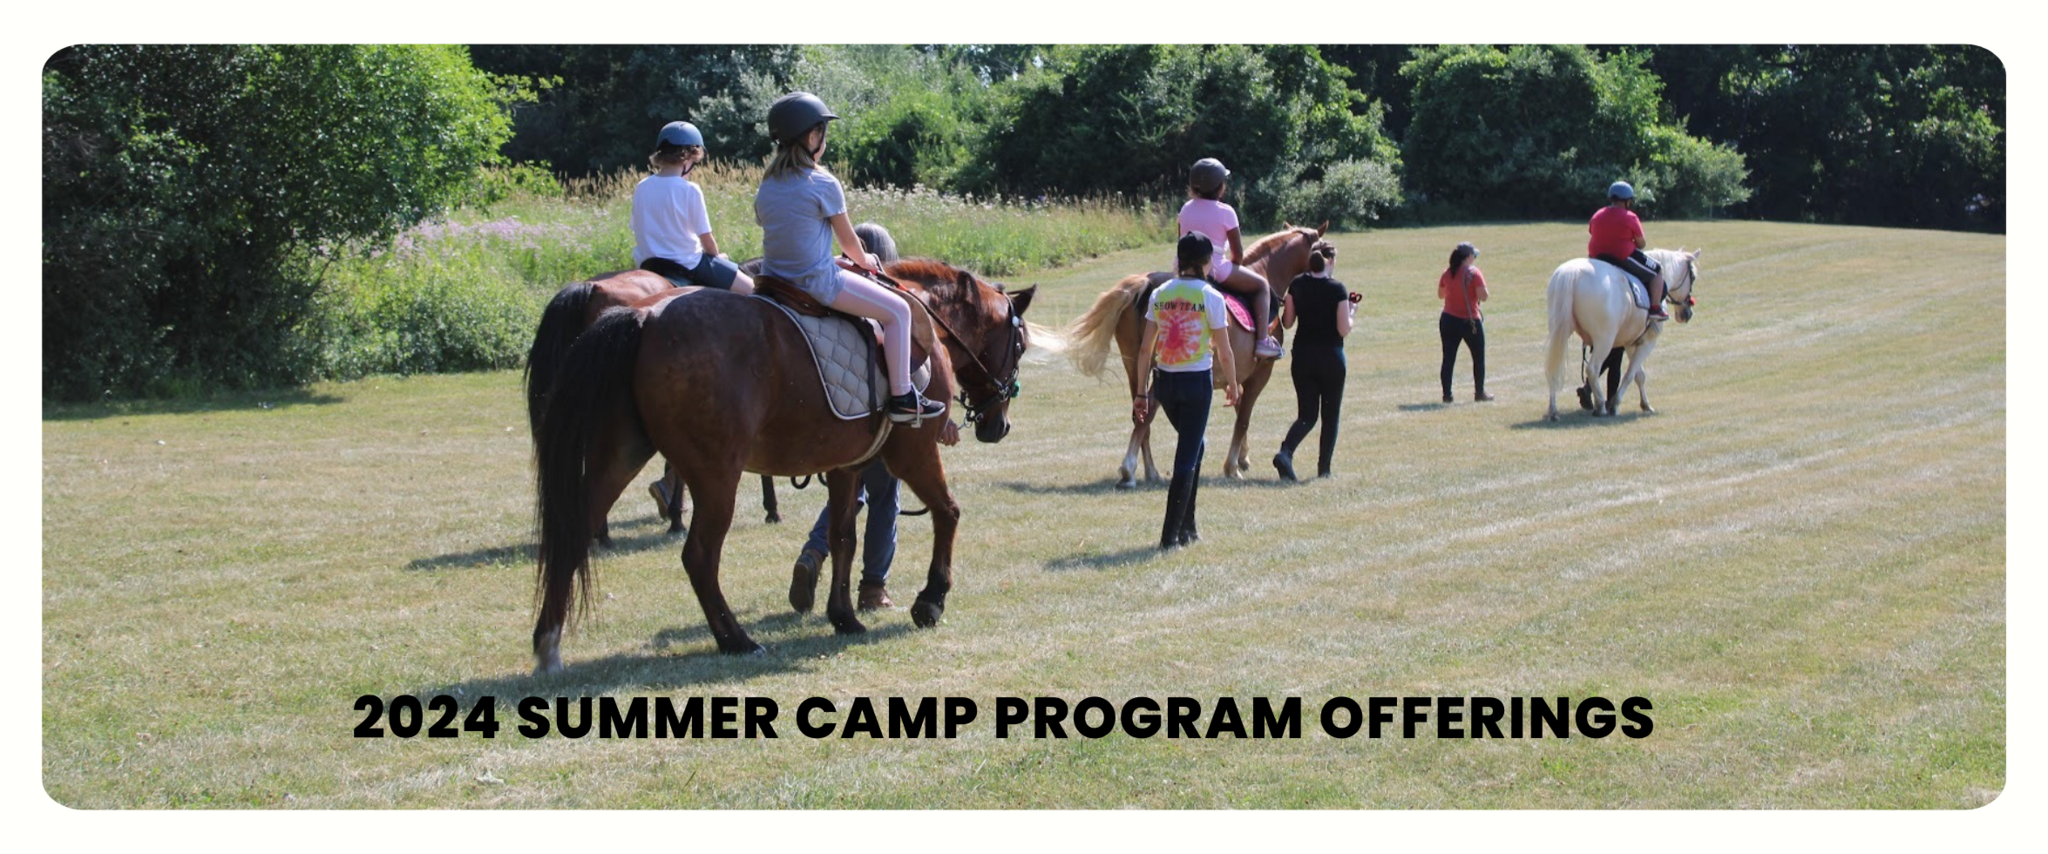 2024 Summer camp program offerings students riding horses